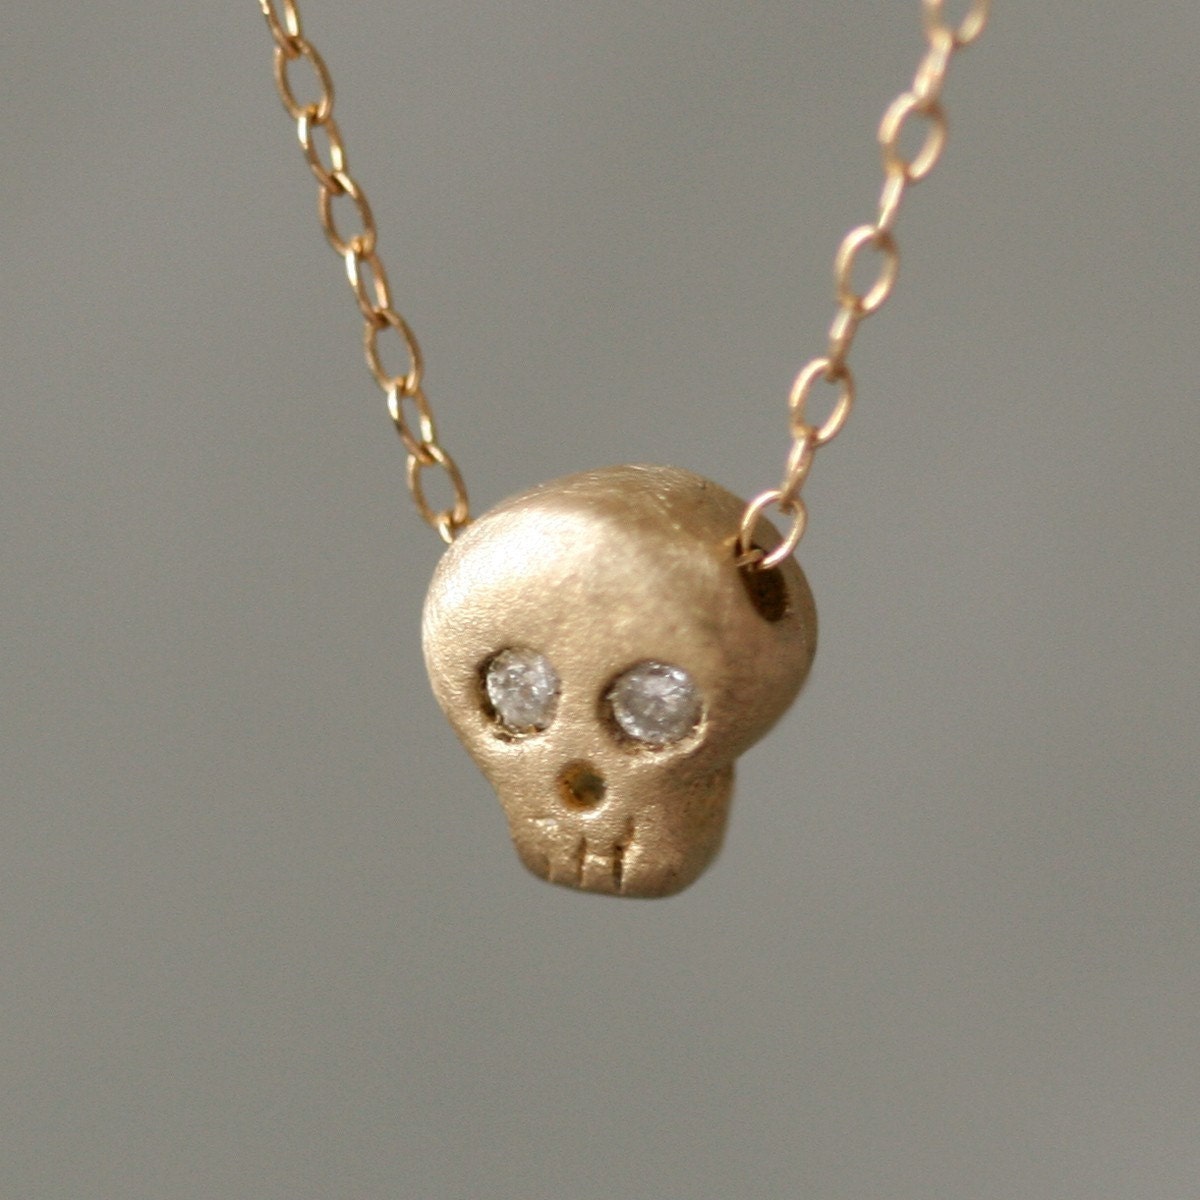 Baby Skull Necklace in 14K Yellow Gold with Diamonds